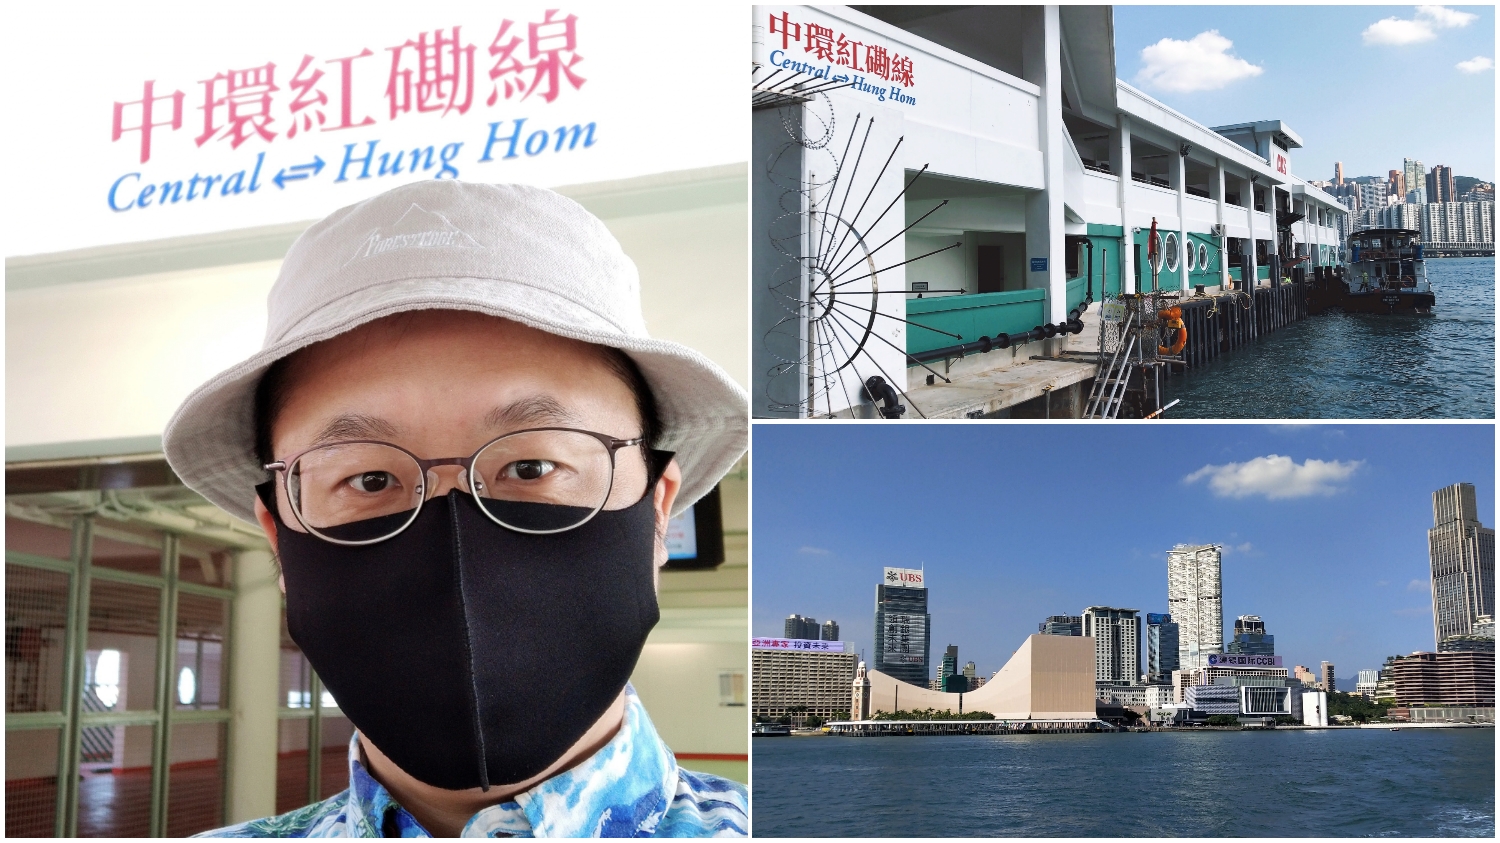 Share Frank's introduction of Hung Hom to Central ferry ride